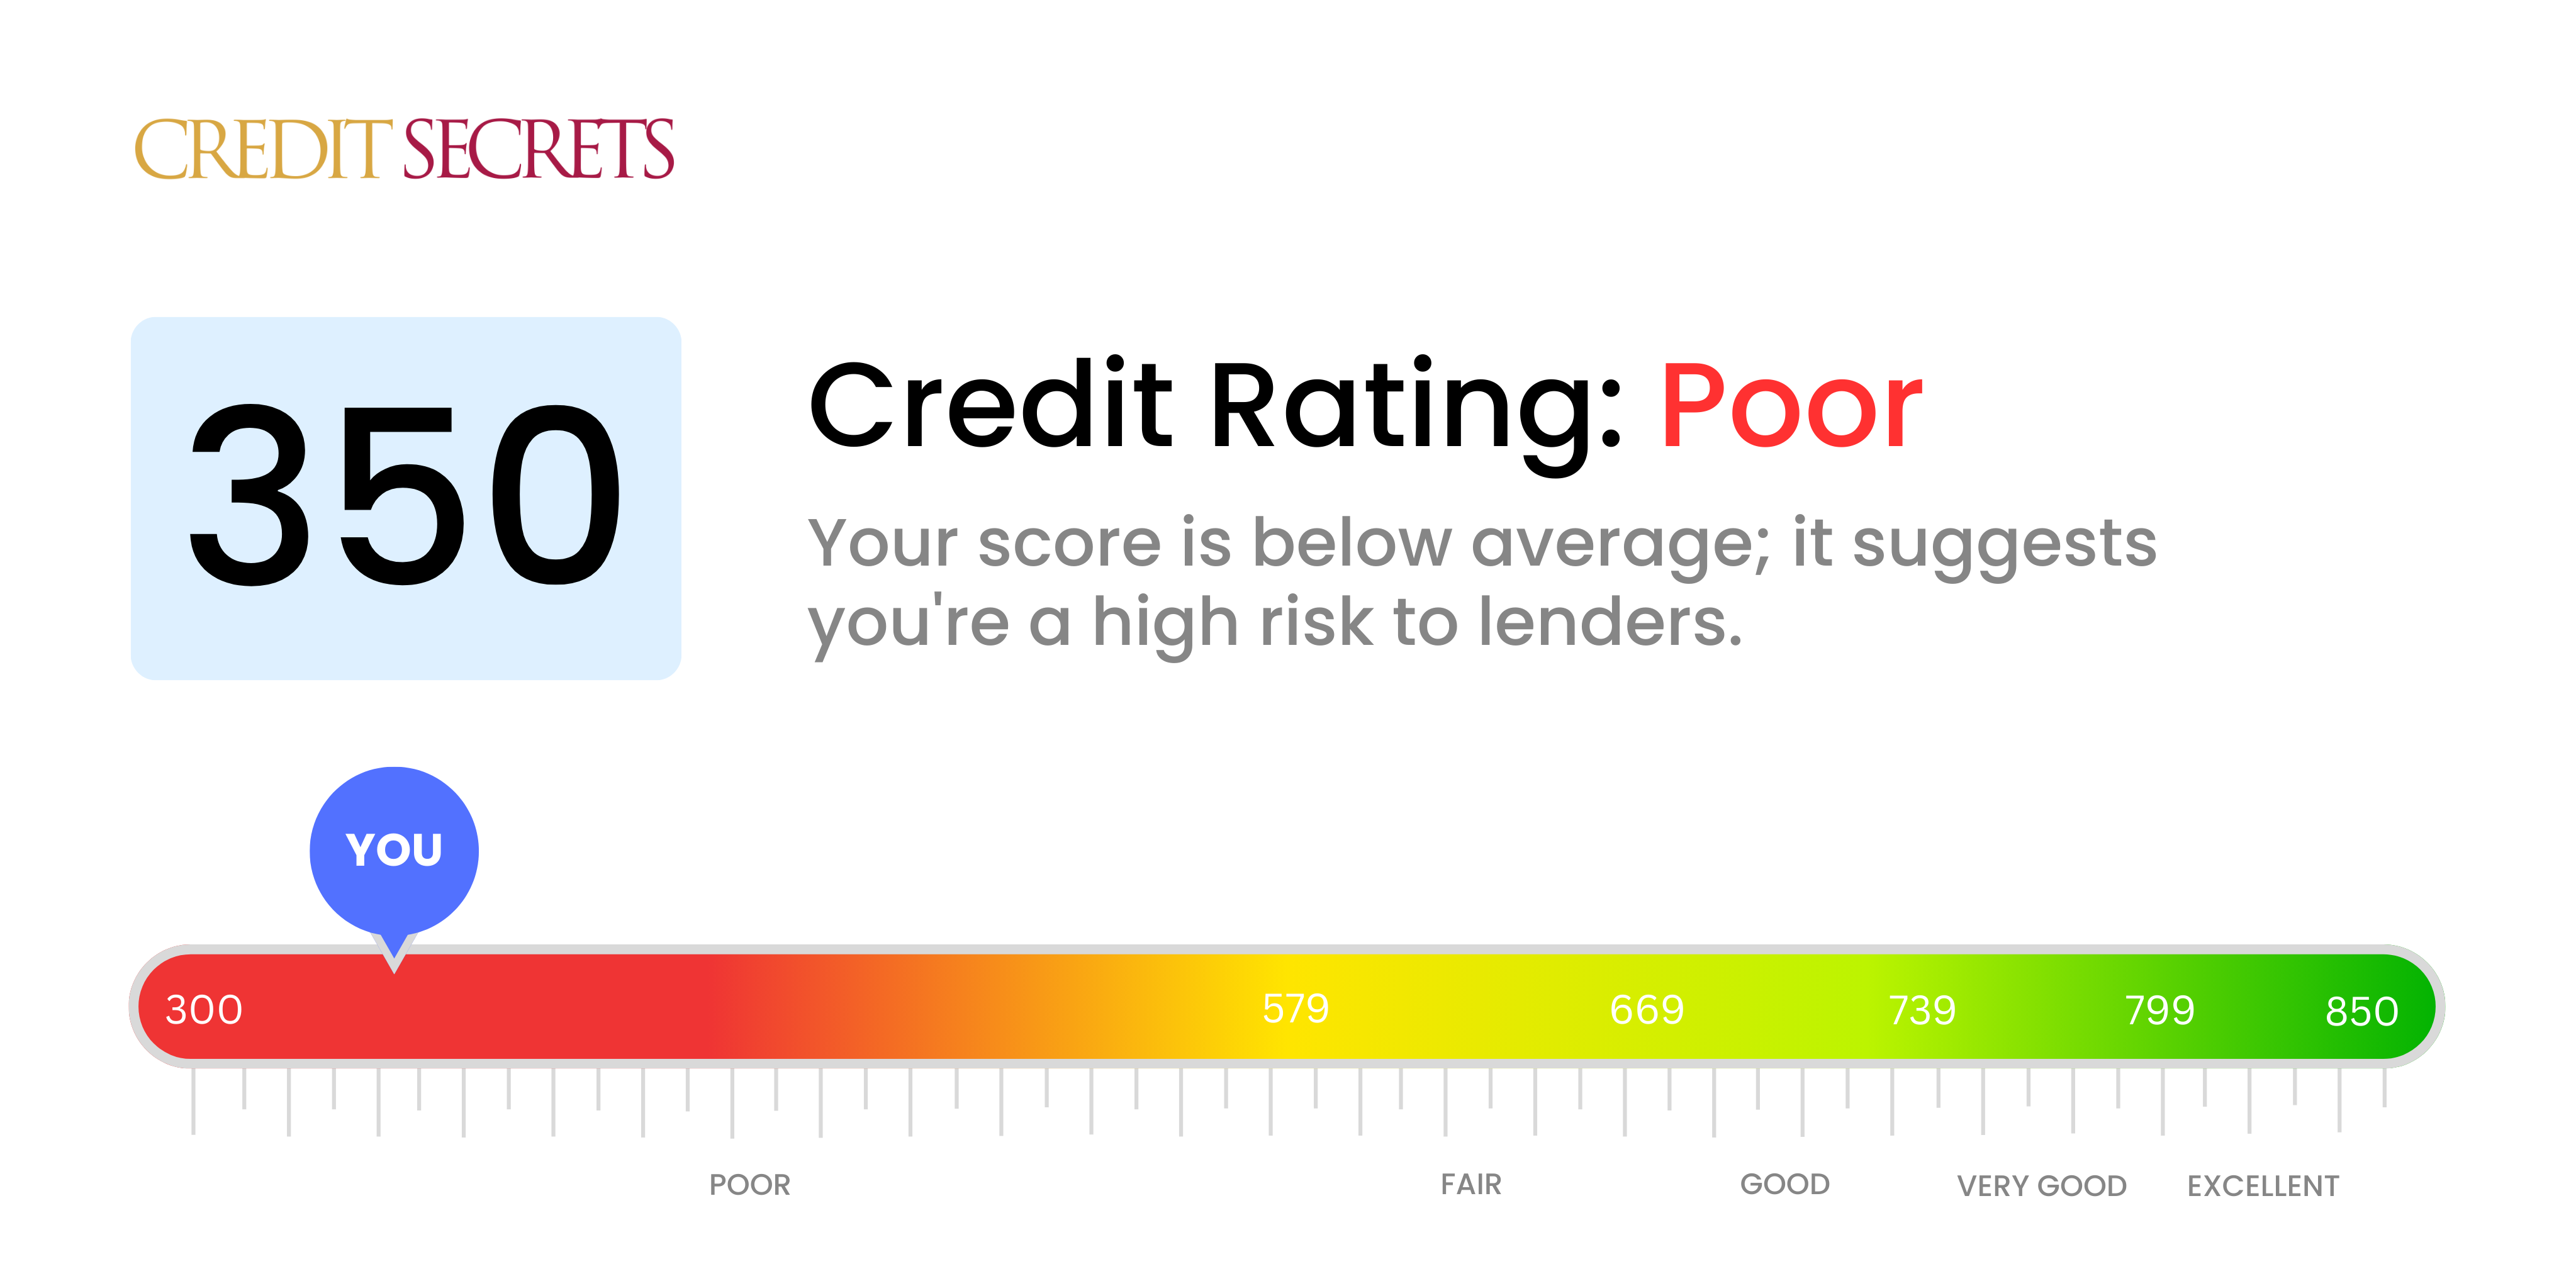 Is 350 a good credit score?